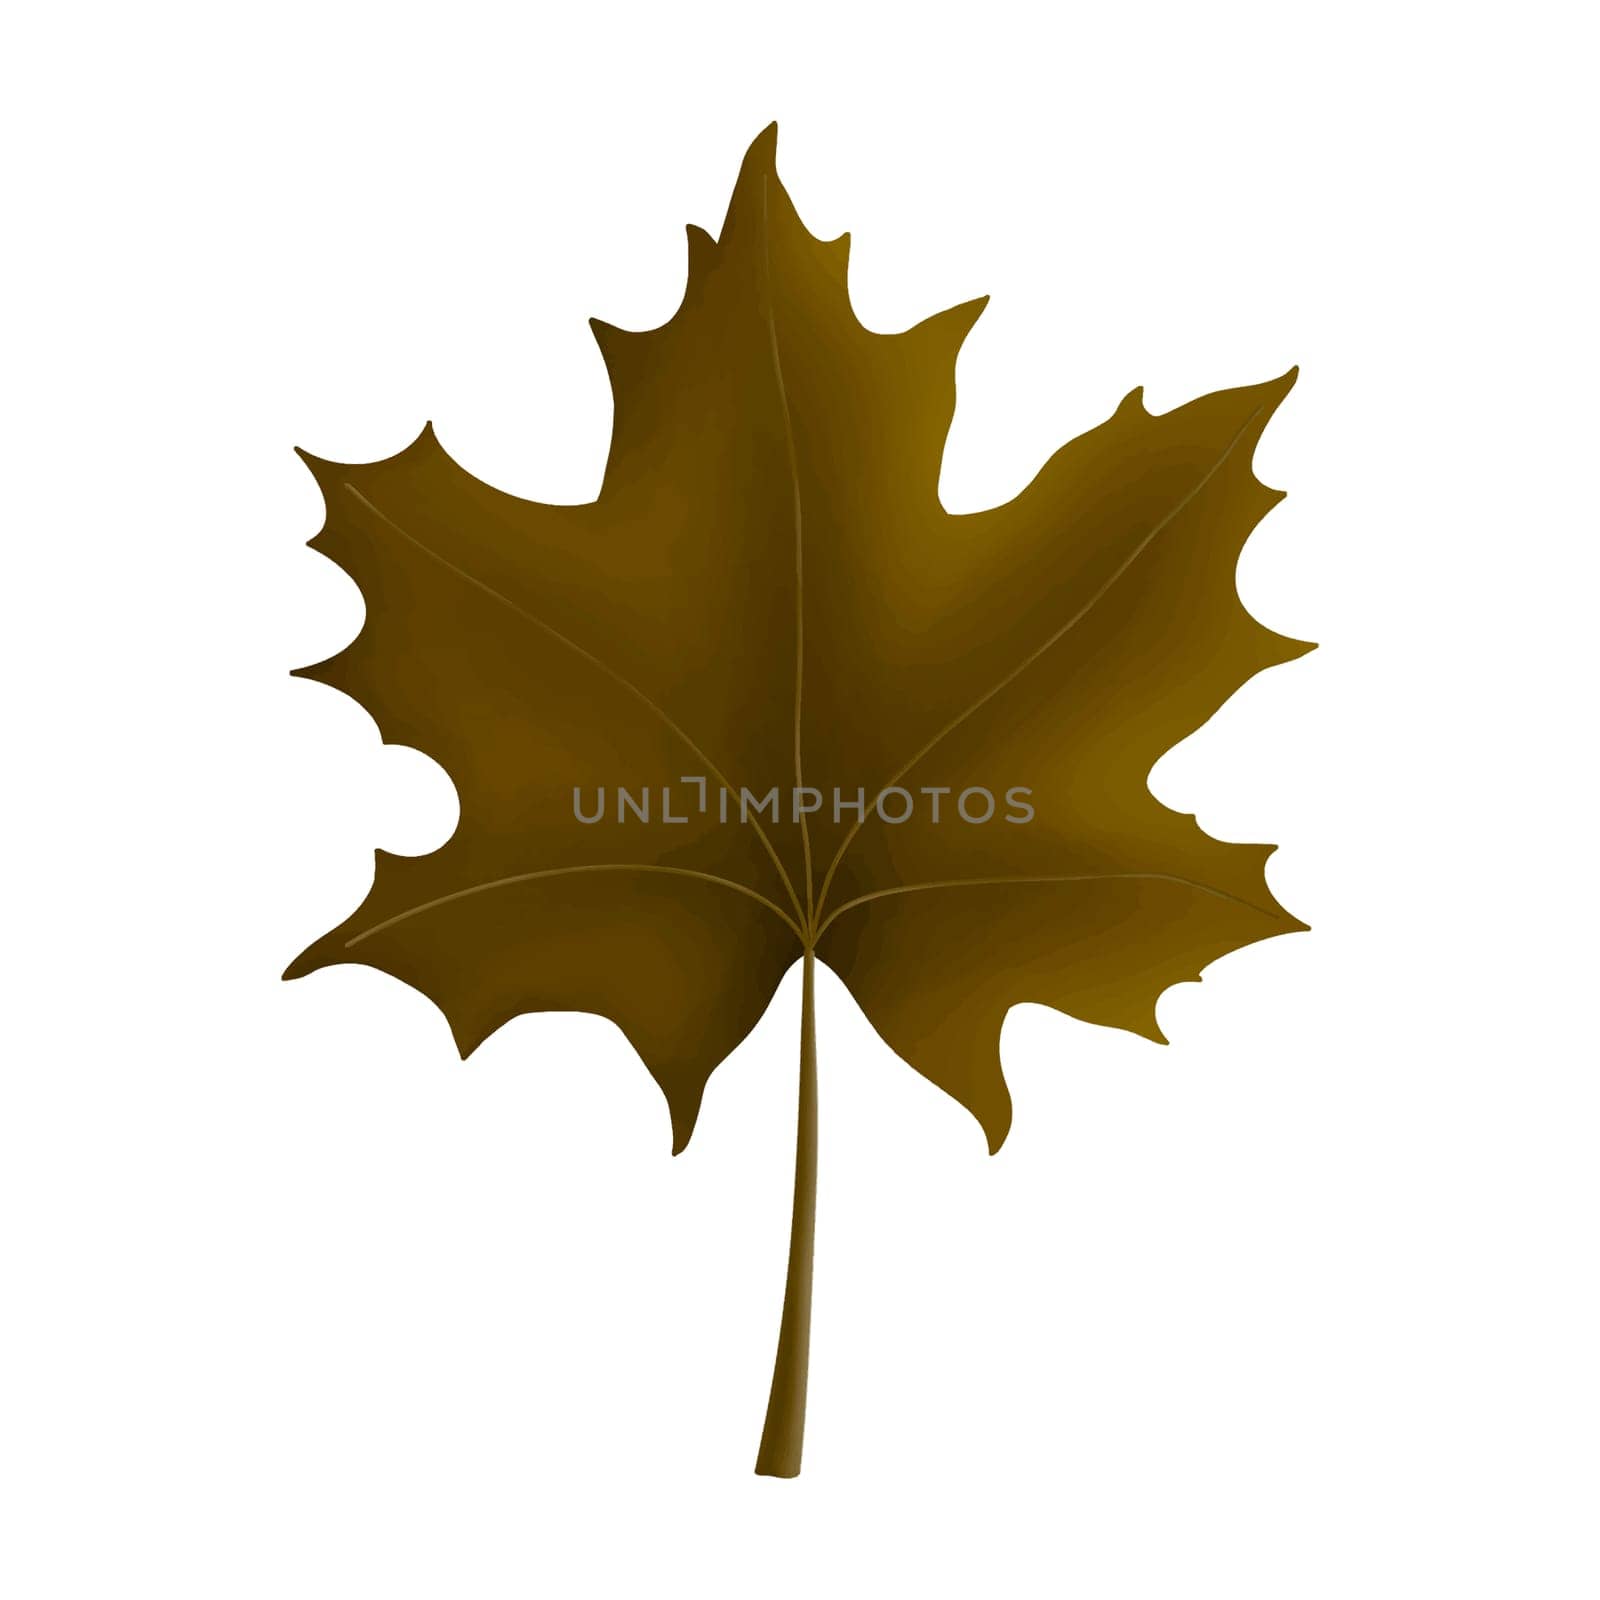 Autumn Maple Leaf Isolated Clipart. Maple Leaves design element isolated on white background for pattern, decoration, planner sticker, sublimation and more. by Skyecreativestudio